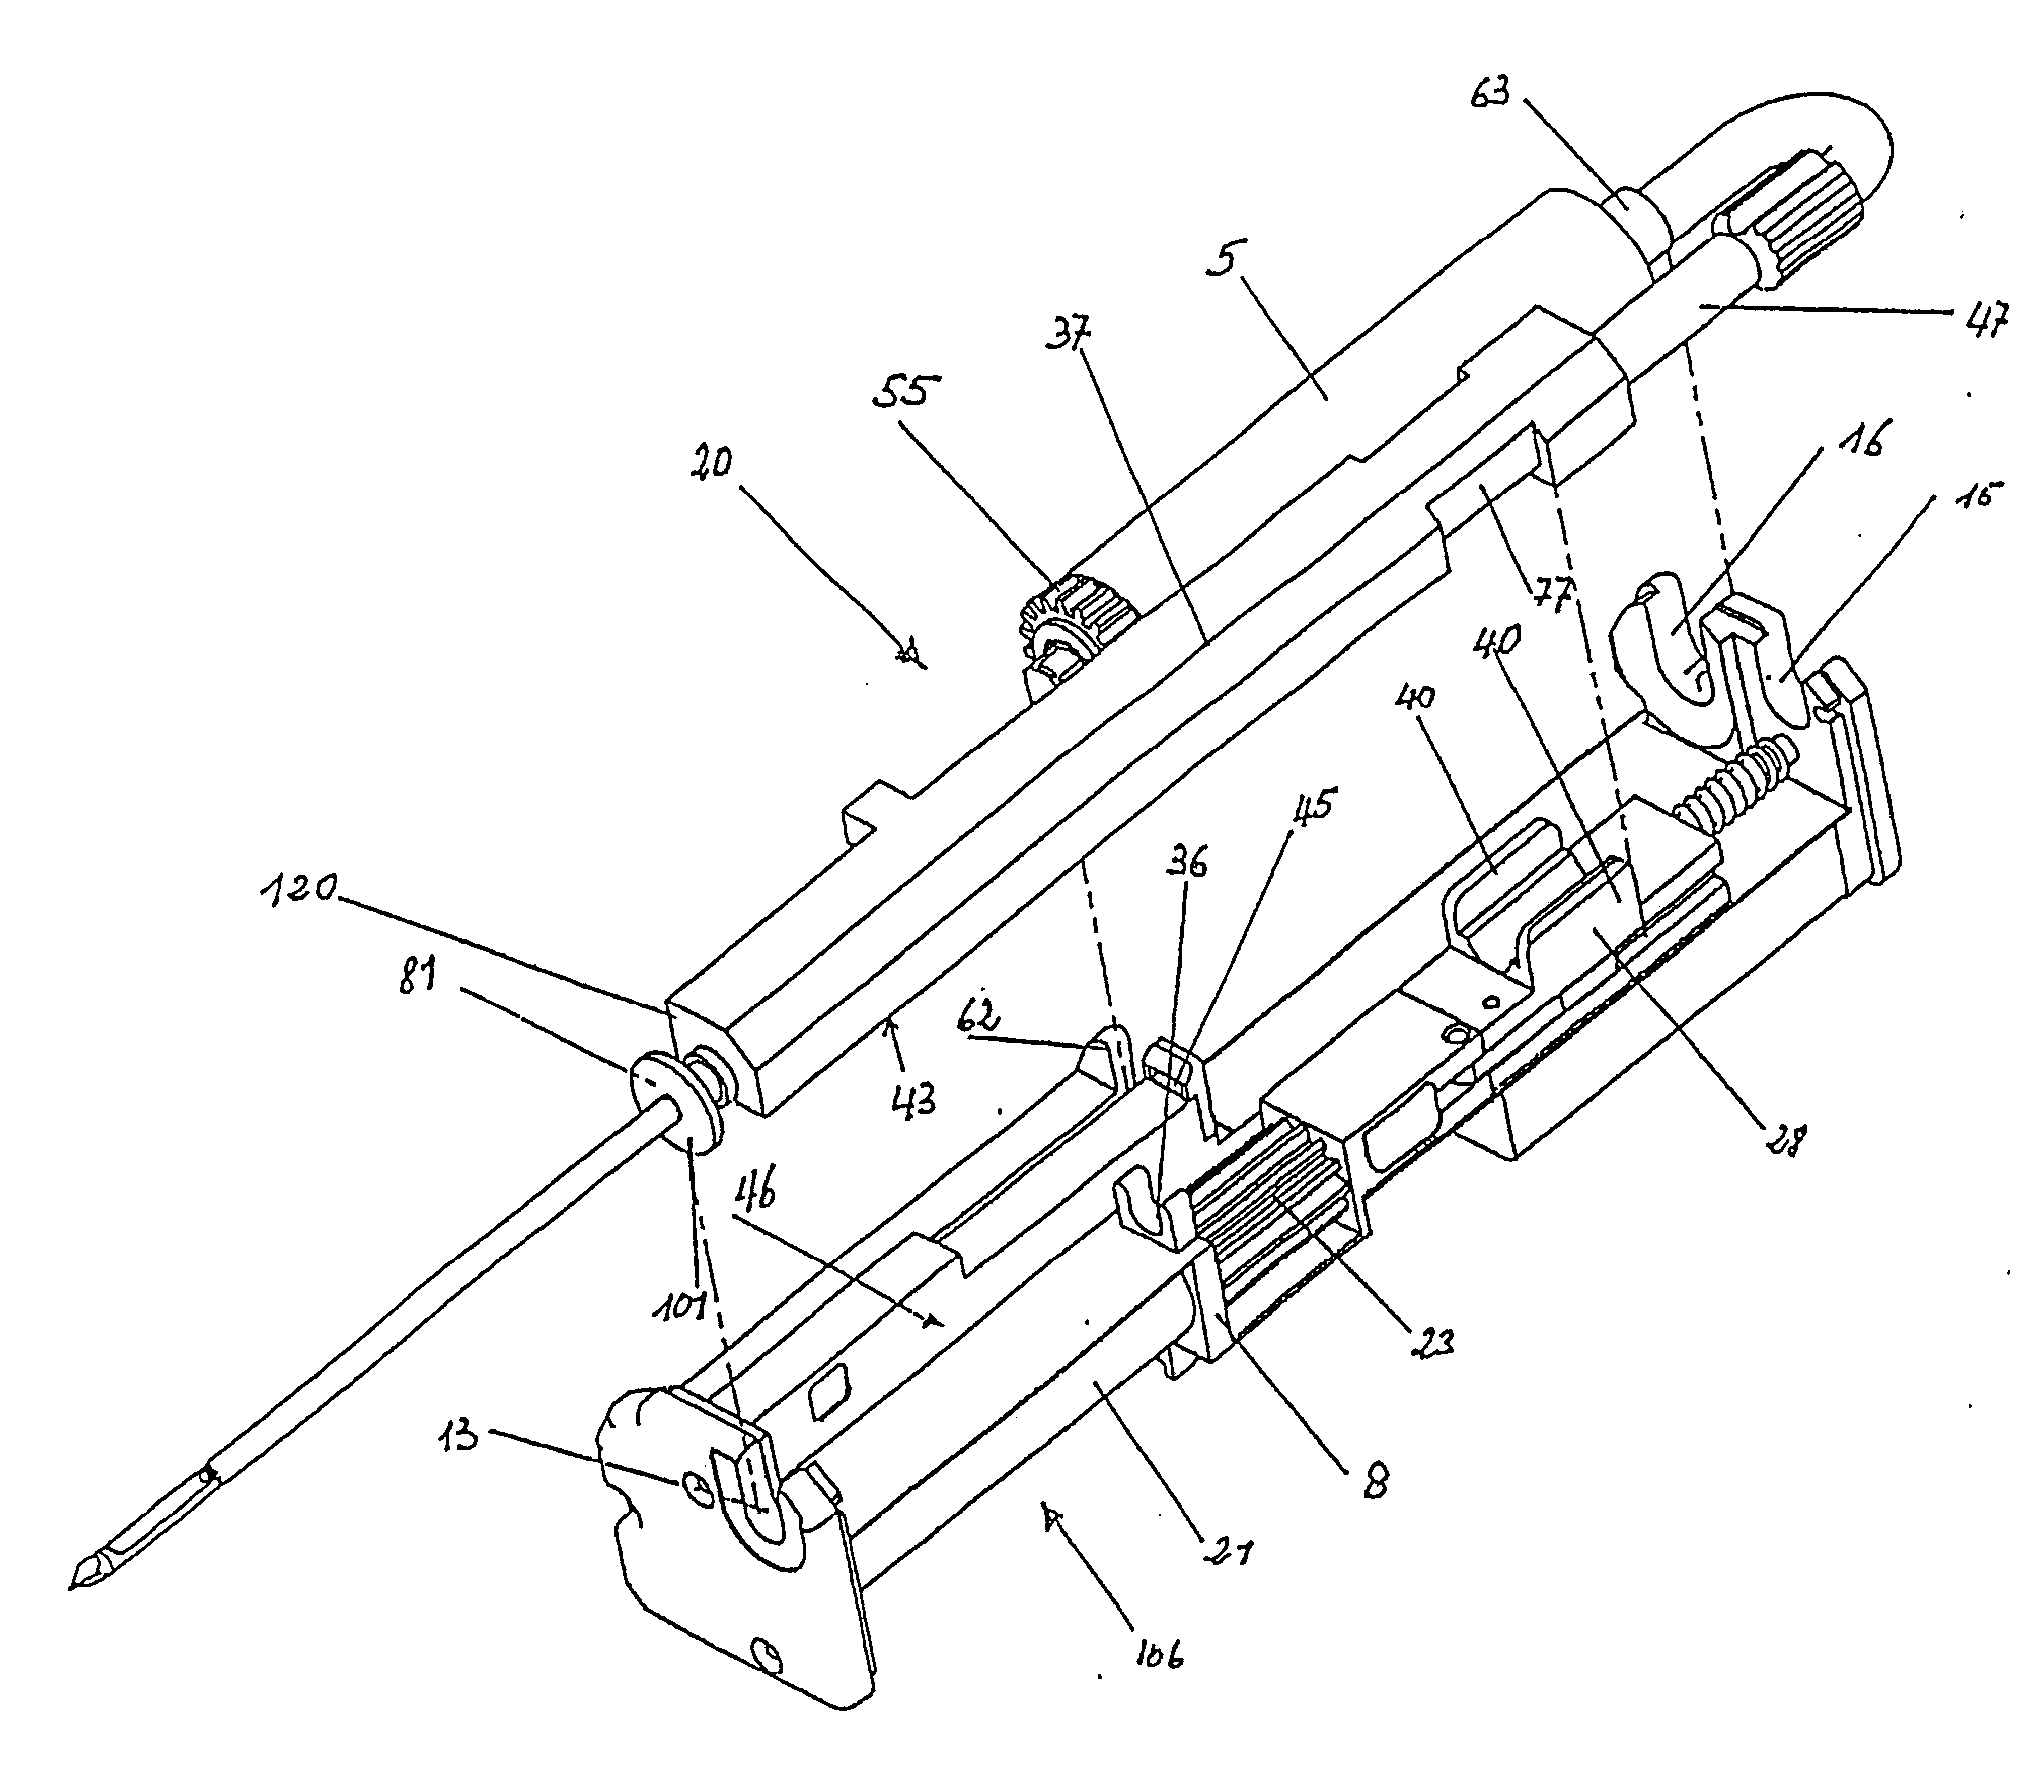 Biopsy device for removing tissue specimens using a vacuum